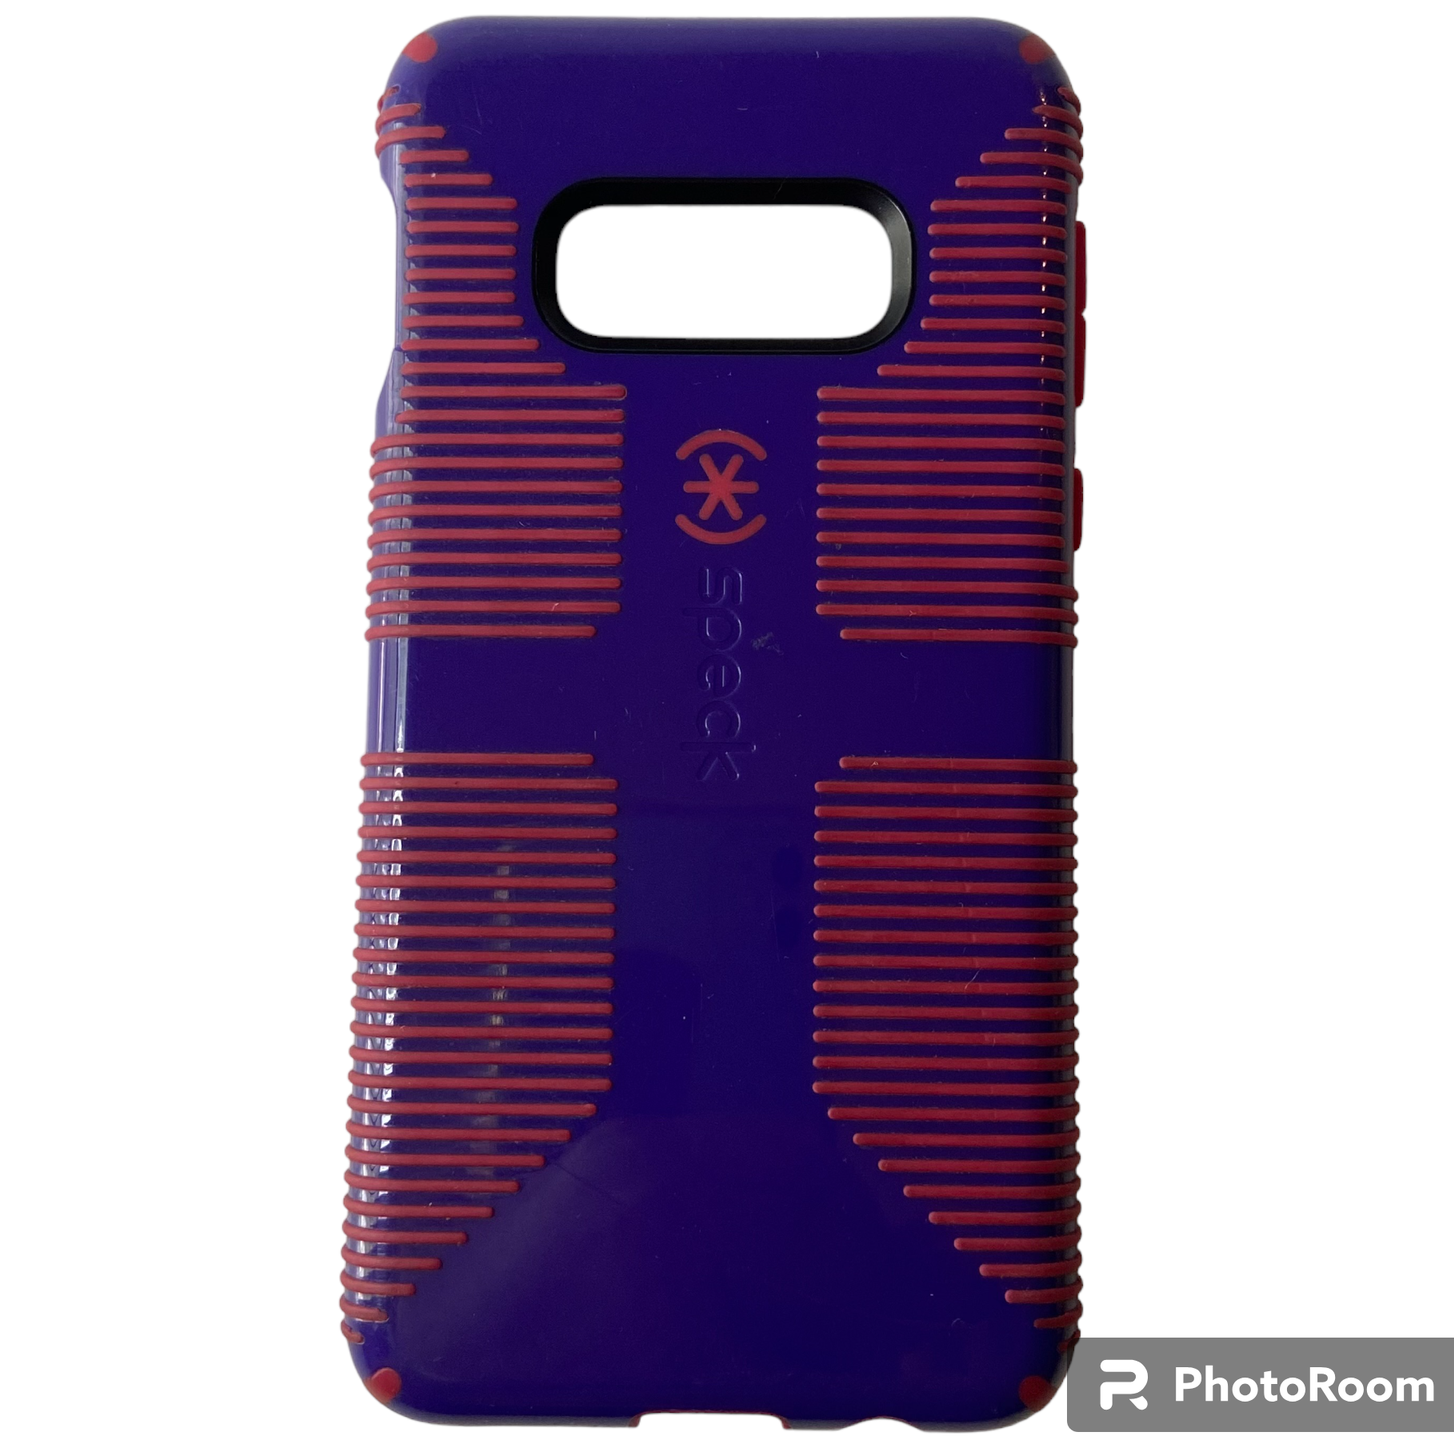 Speck Cell Phone Case Galaxy S10 CandyShell Grip UV Purple Ruby Red 124585 7474 - $6.87